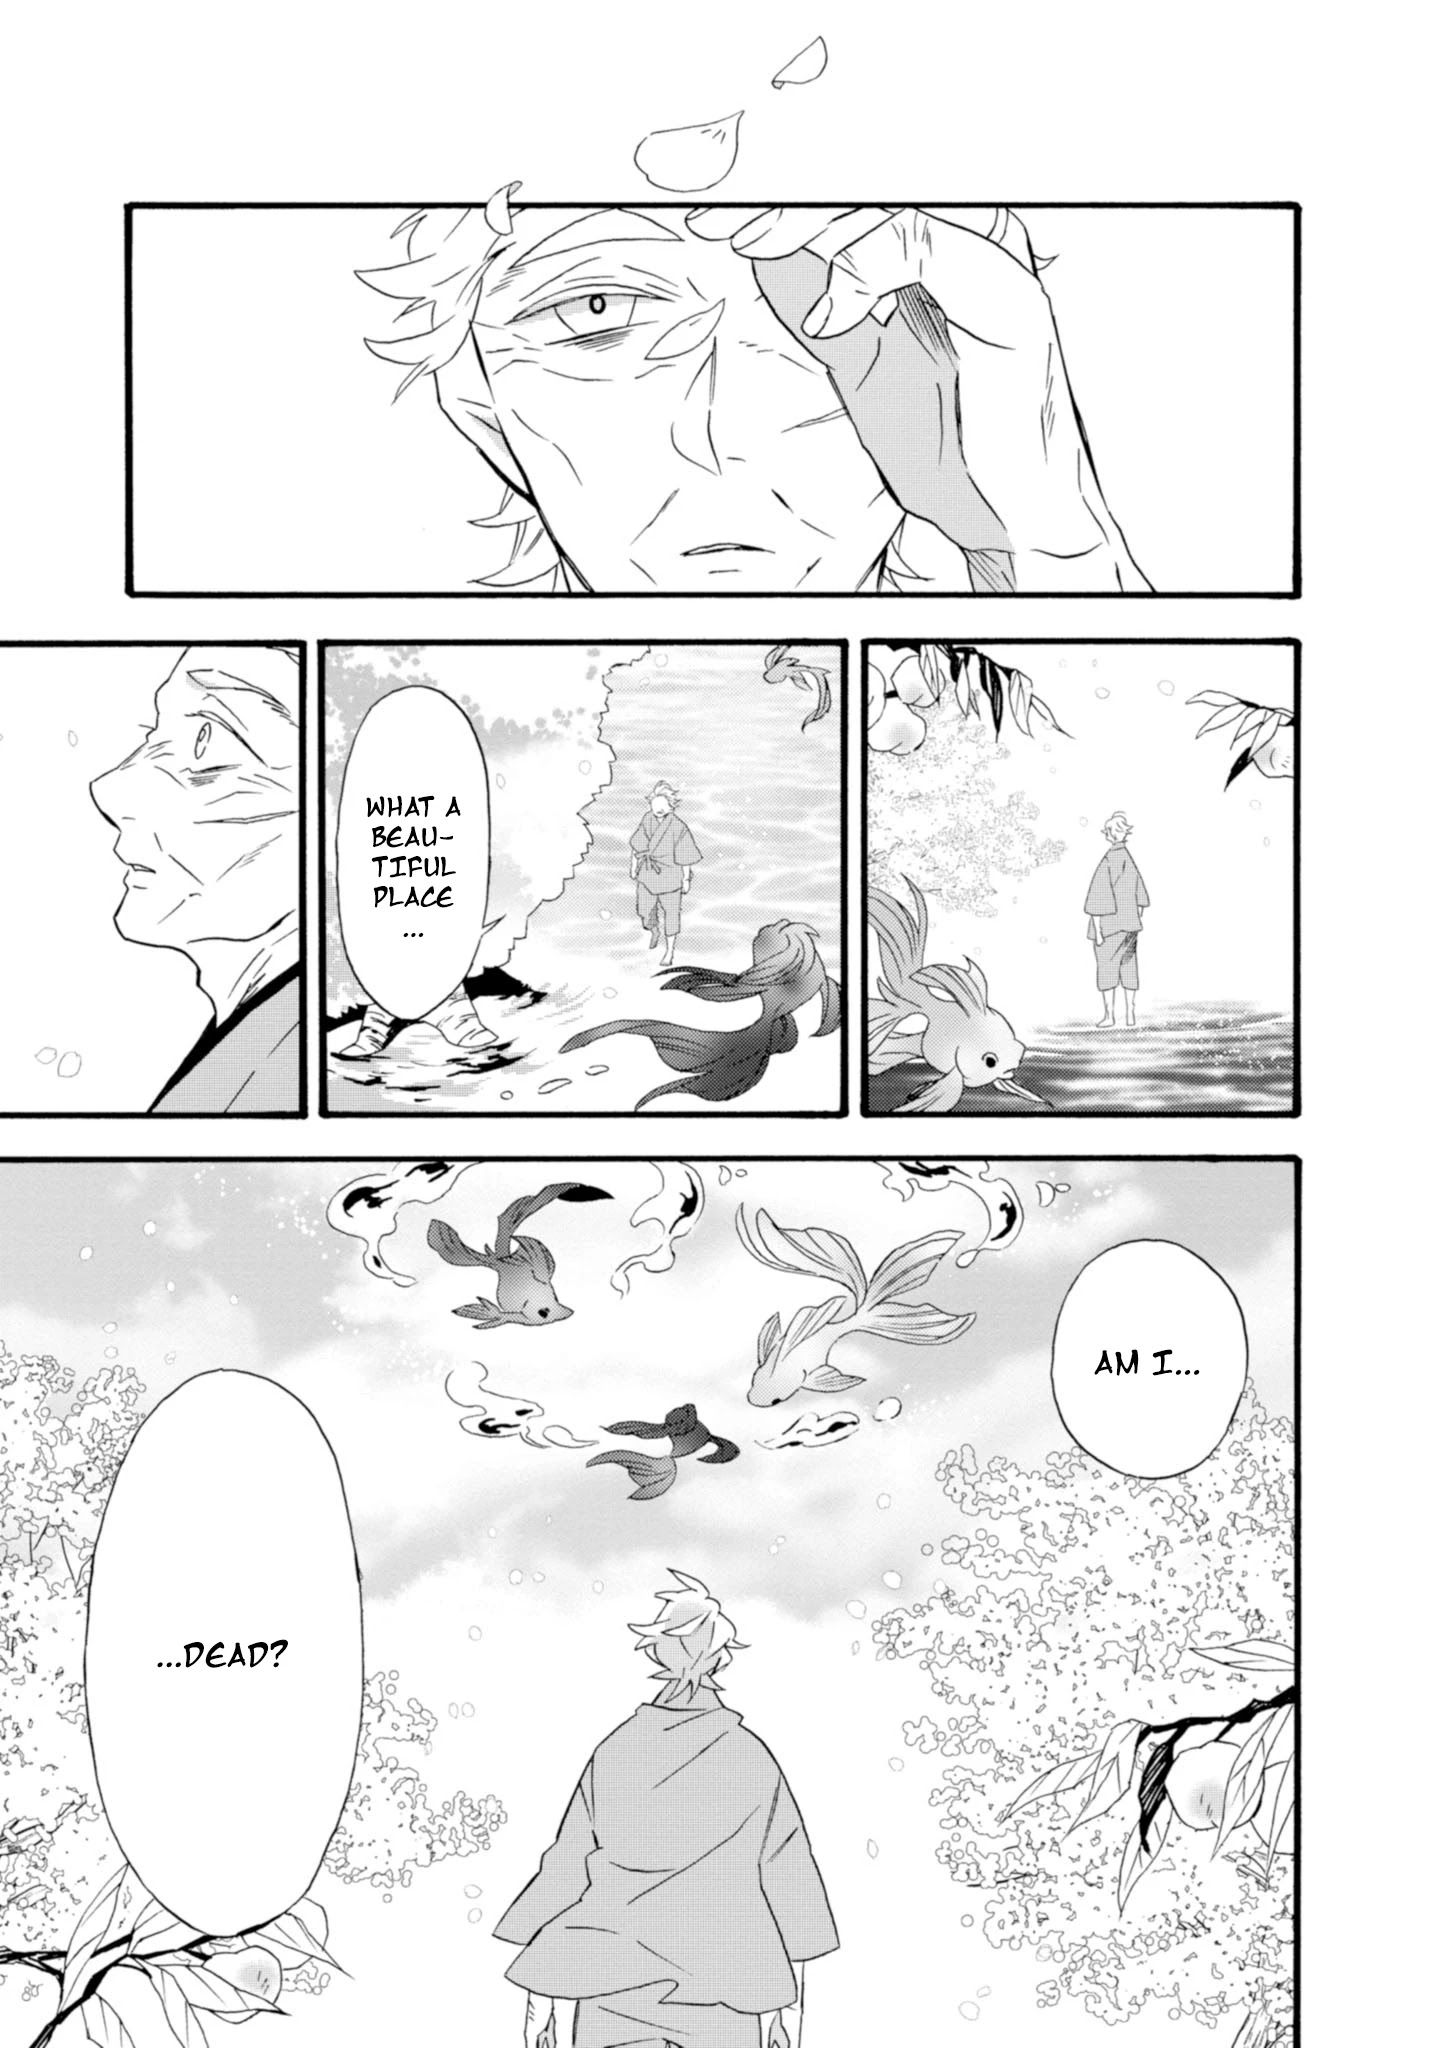 Will You Marry Me Again If You Are Reborn? - Page 1